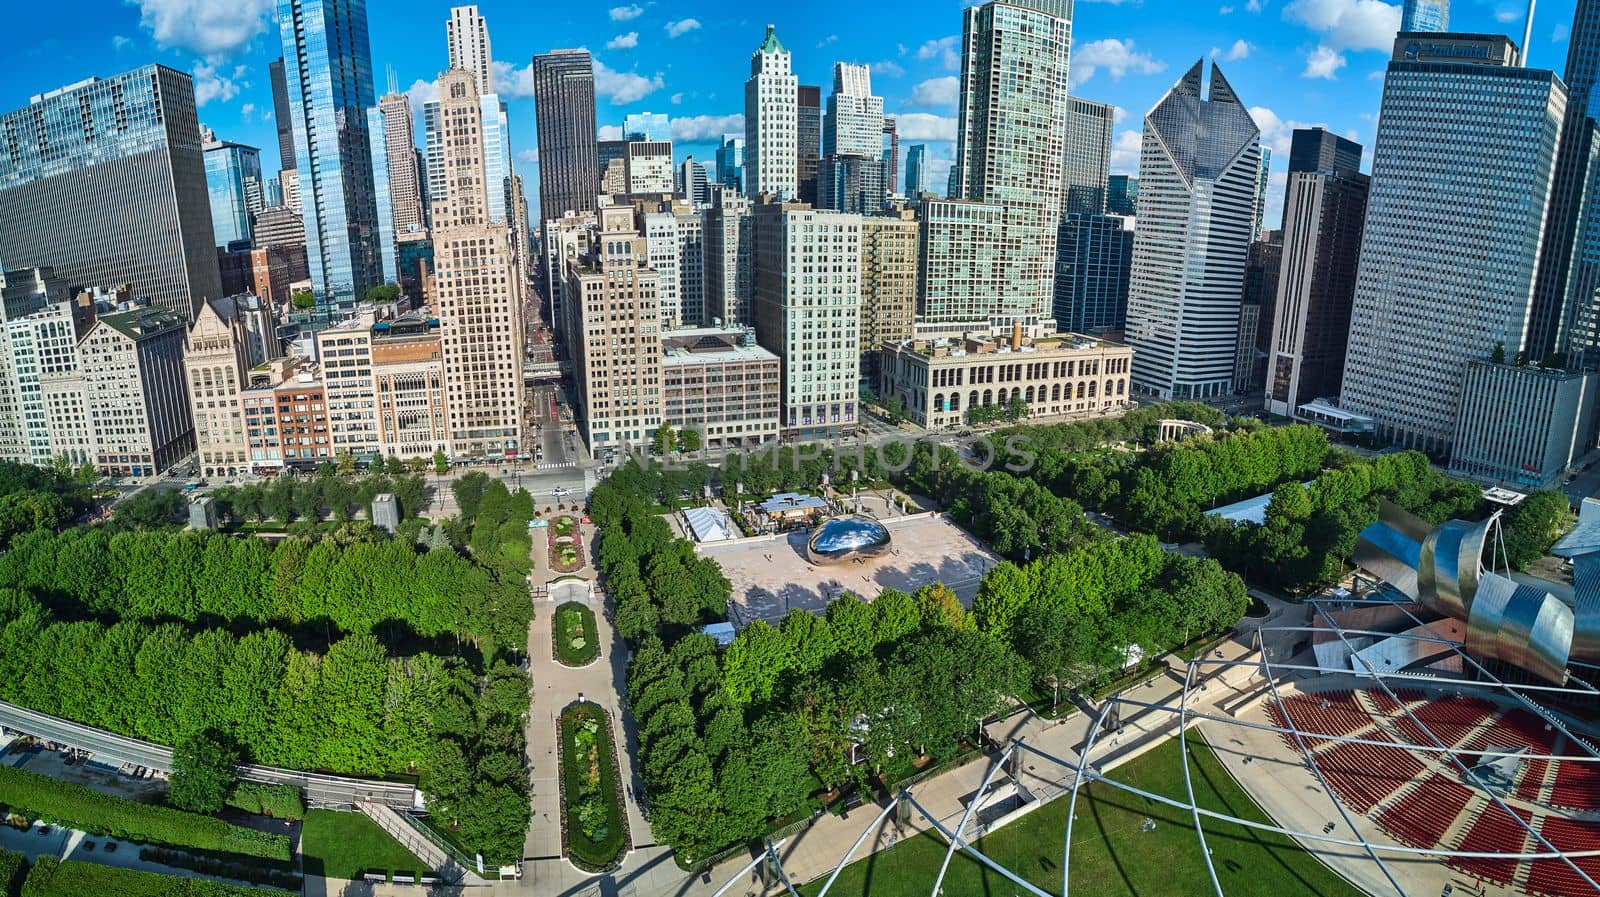 Wide view of Millennium Park from above in Chicago by Cloud Gate by njproductions